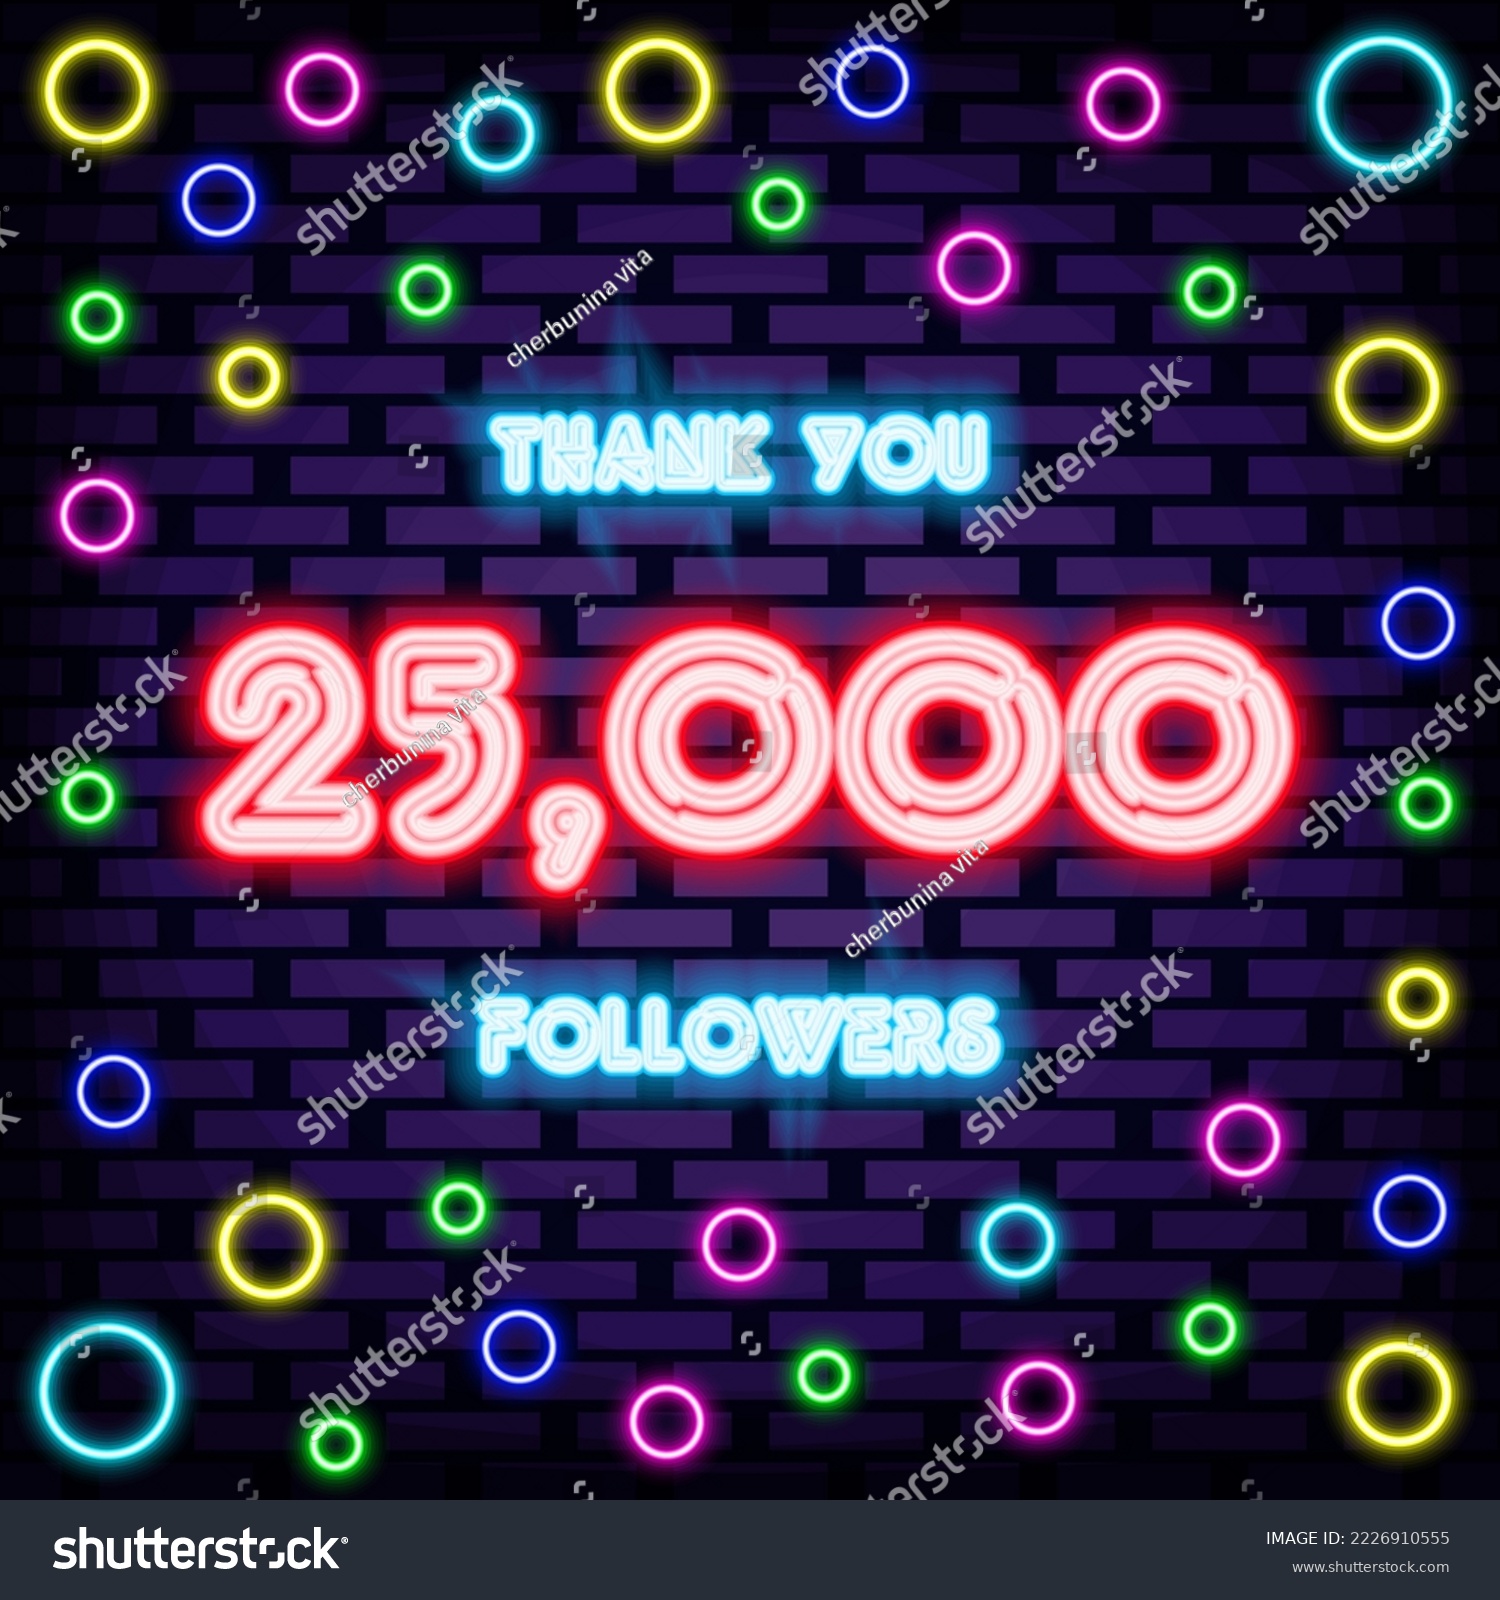 SVG of 25000 Followers Thank you Neon Sign Vector. On brick wall background. Night bright advertising. Isolated on black background. Vector Illustration svg